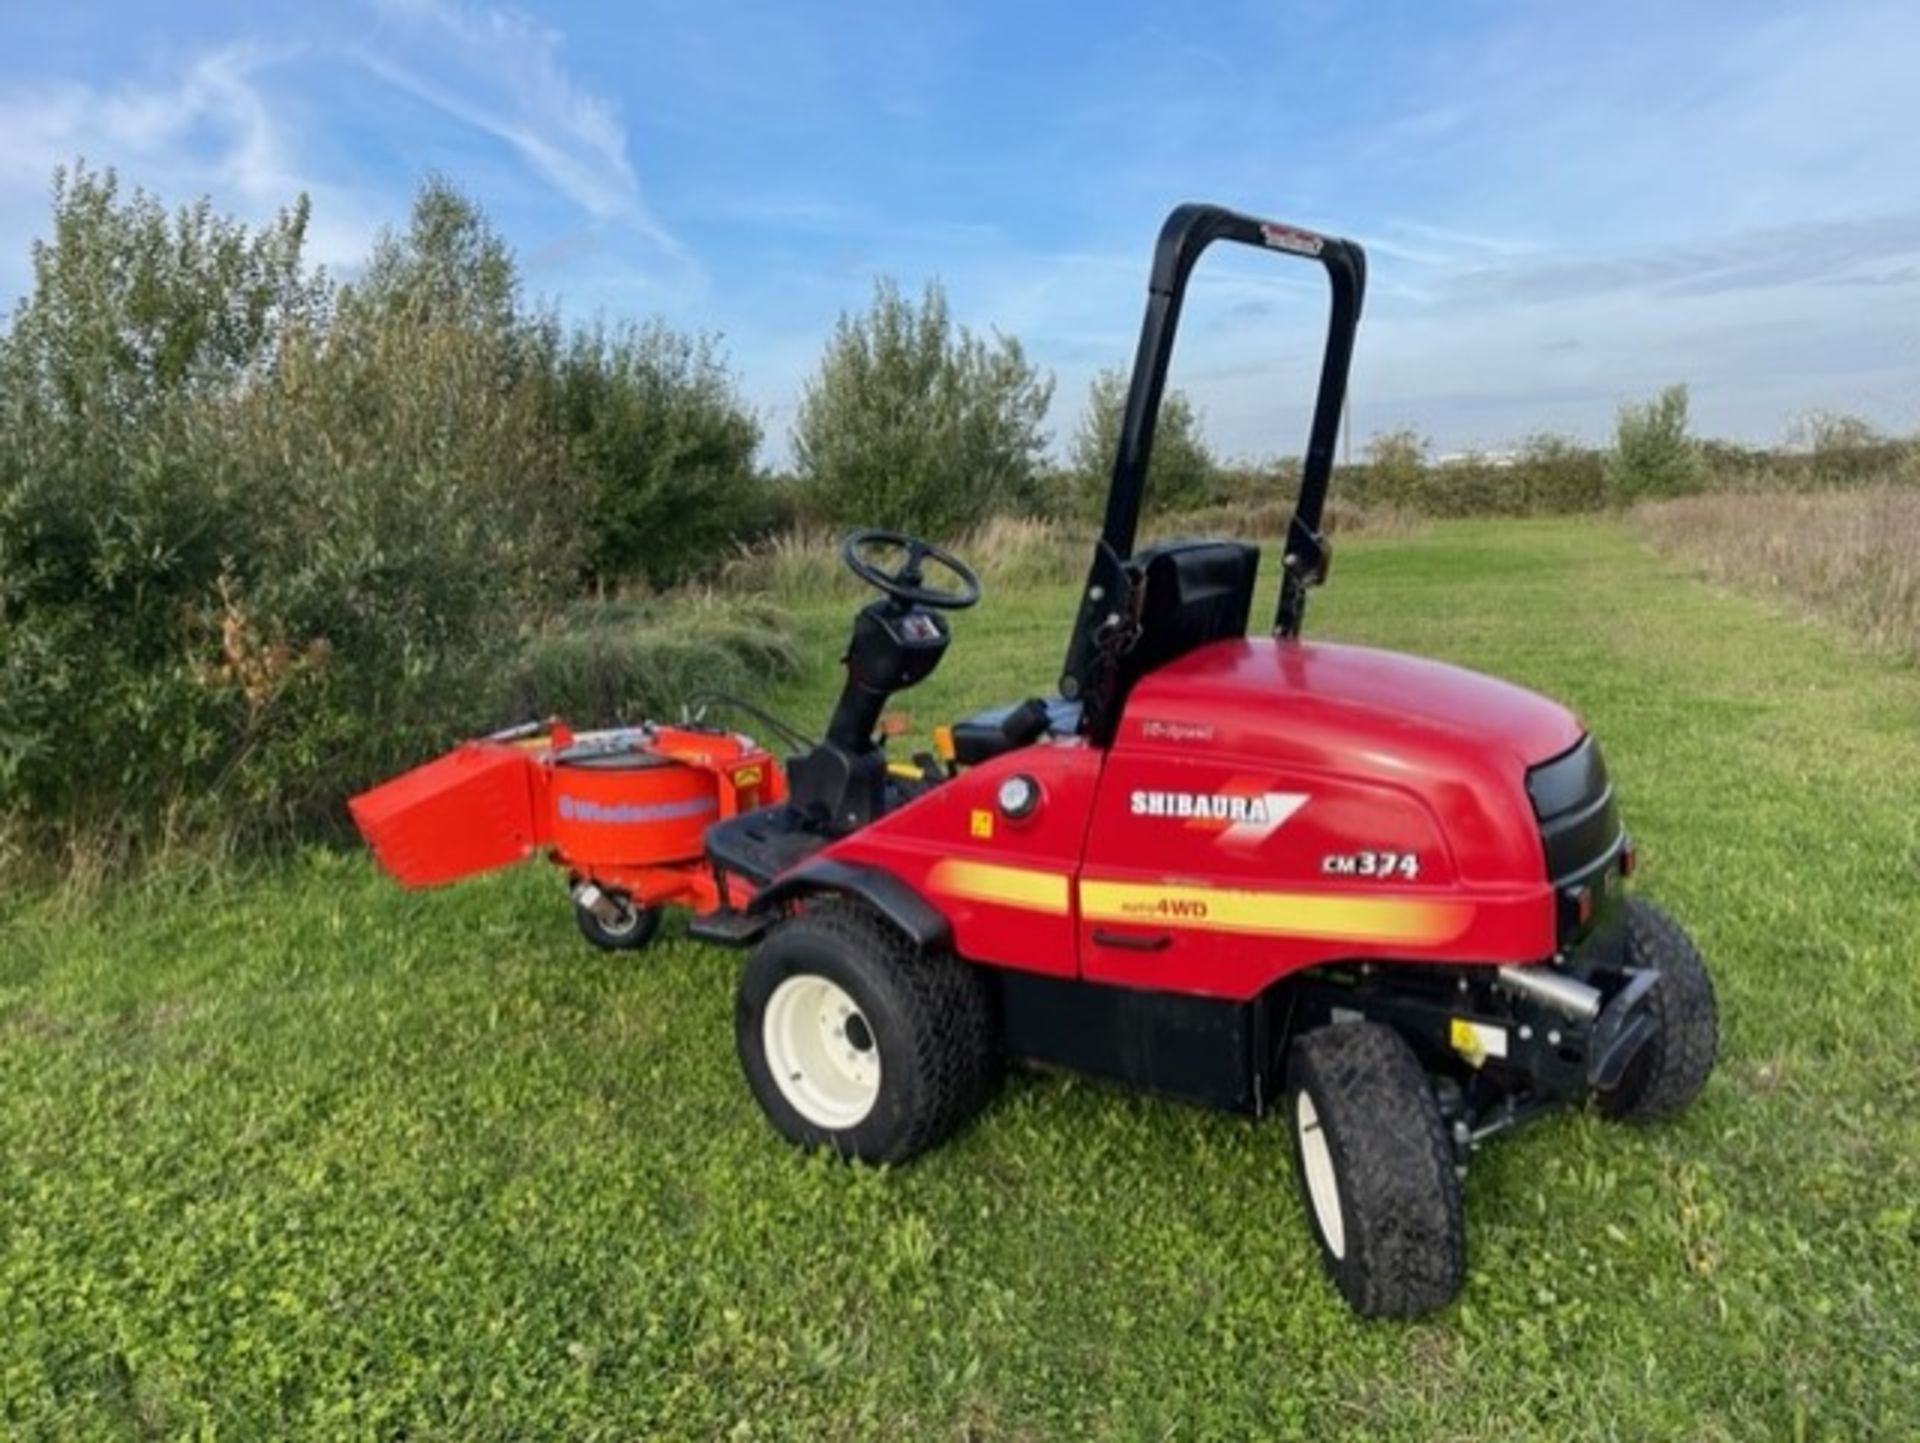 2018, SHIBAURA CM374 OUTFRONT MOWER WITH DECK & BLOWER - Image 5 of 13